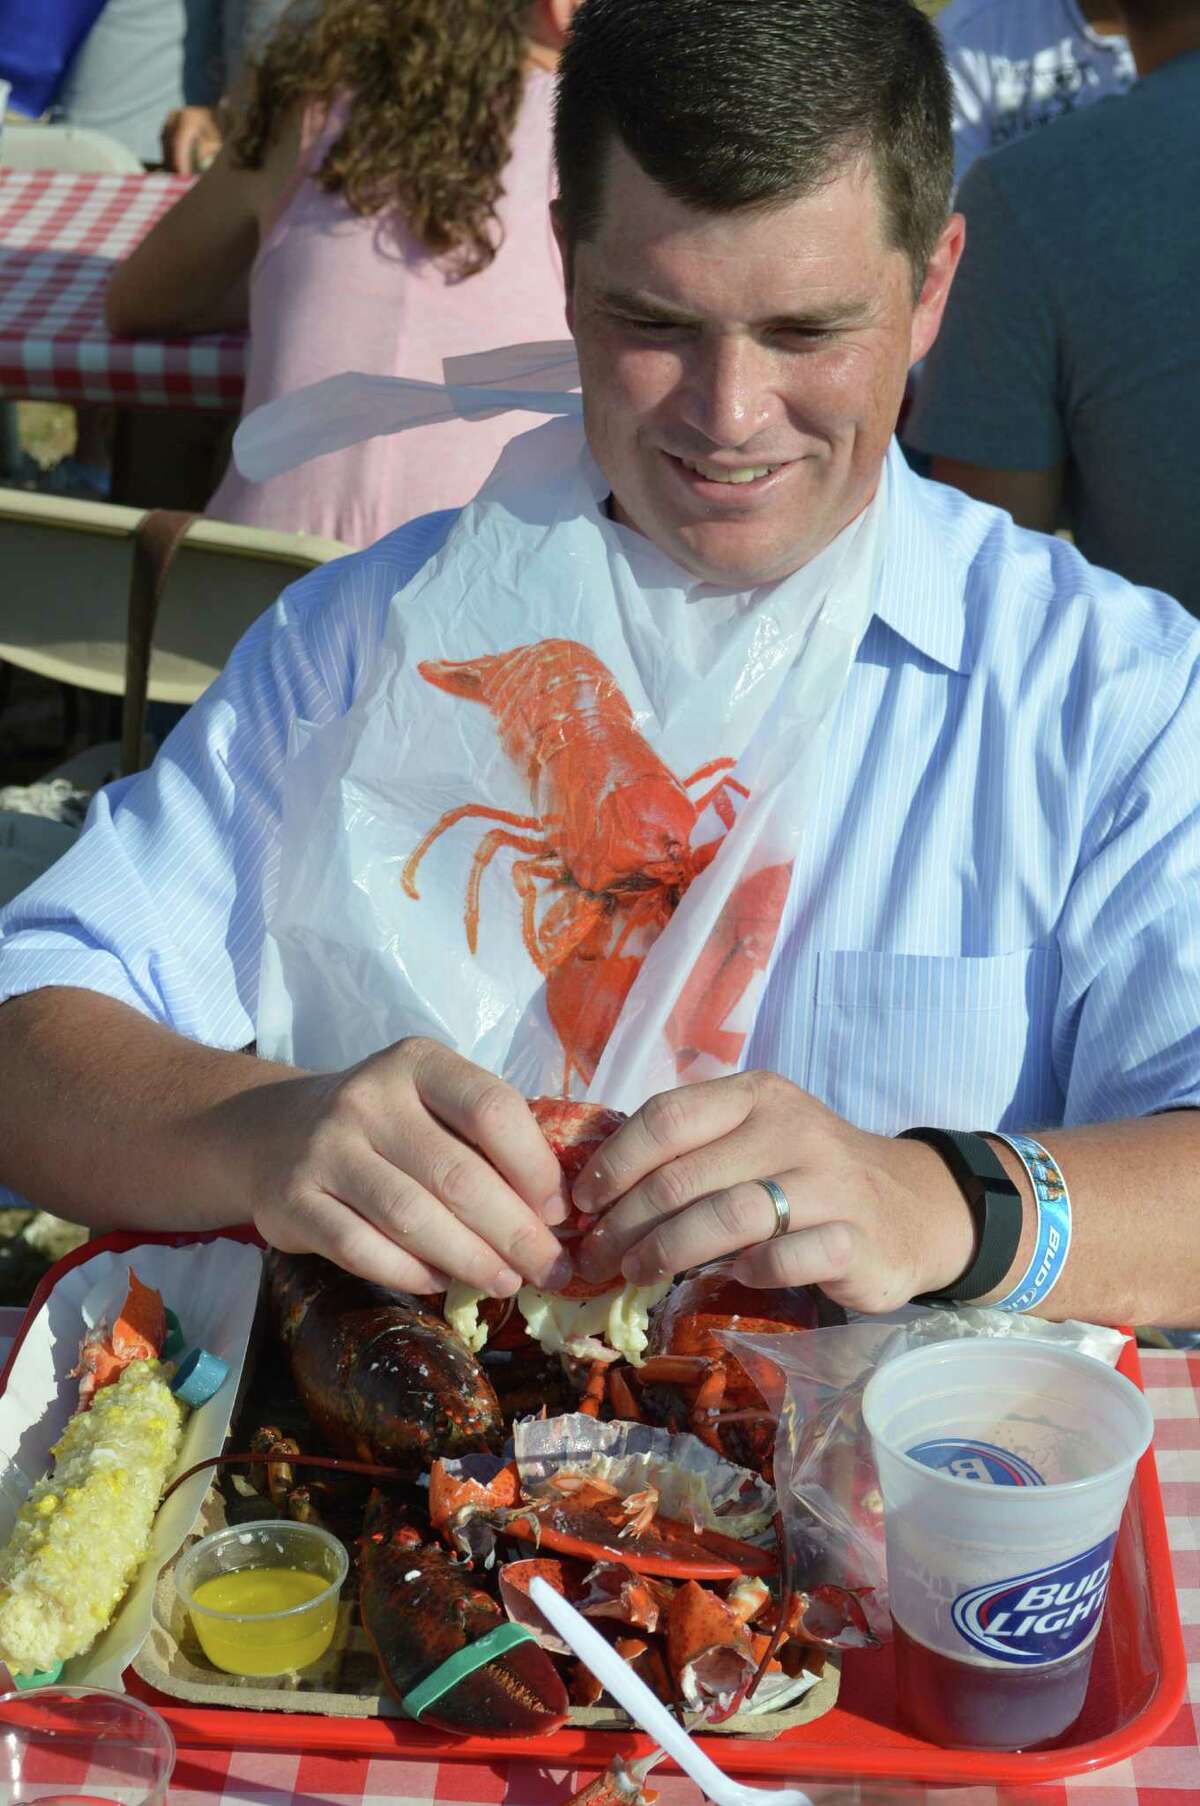 LobsterFest Rotary's crustacean celebration draws big crowd to Compo